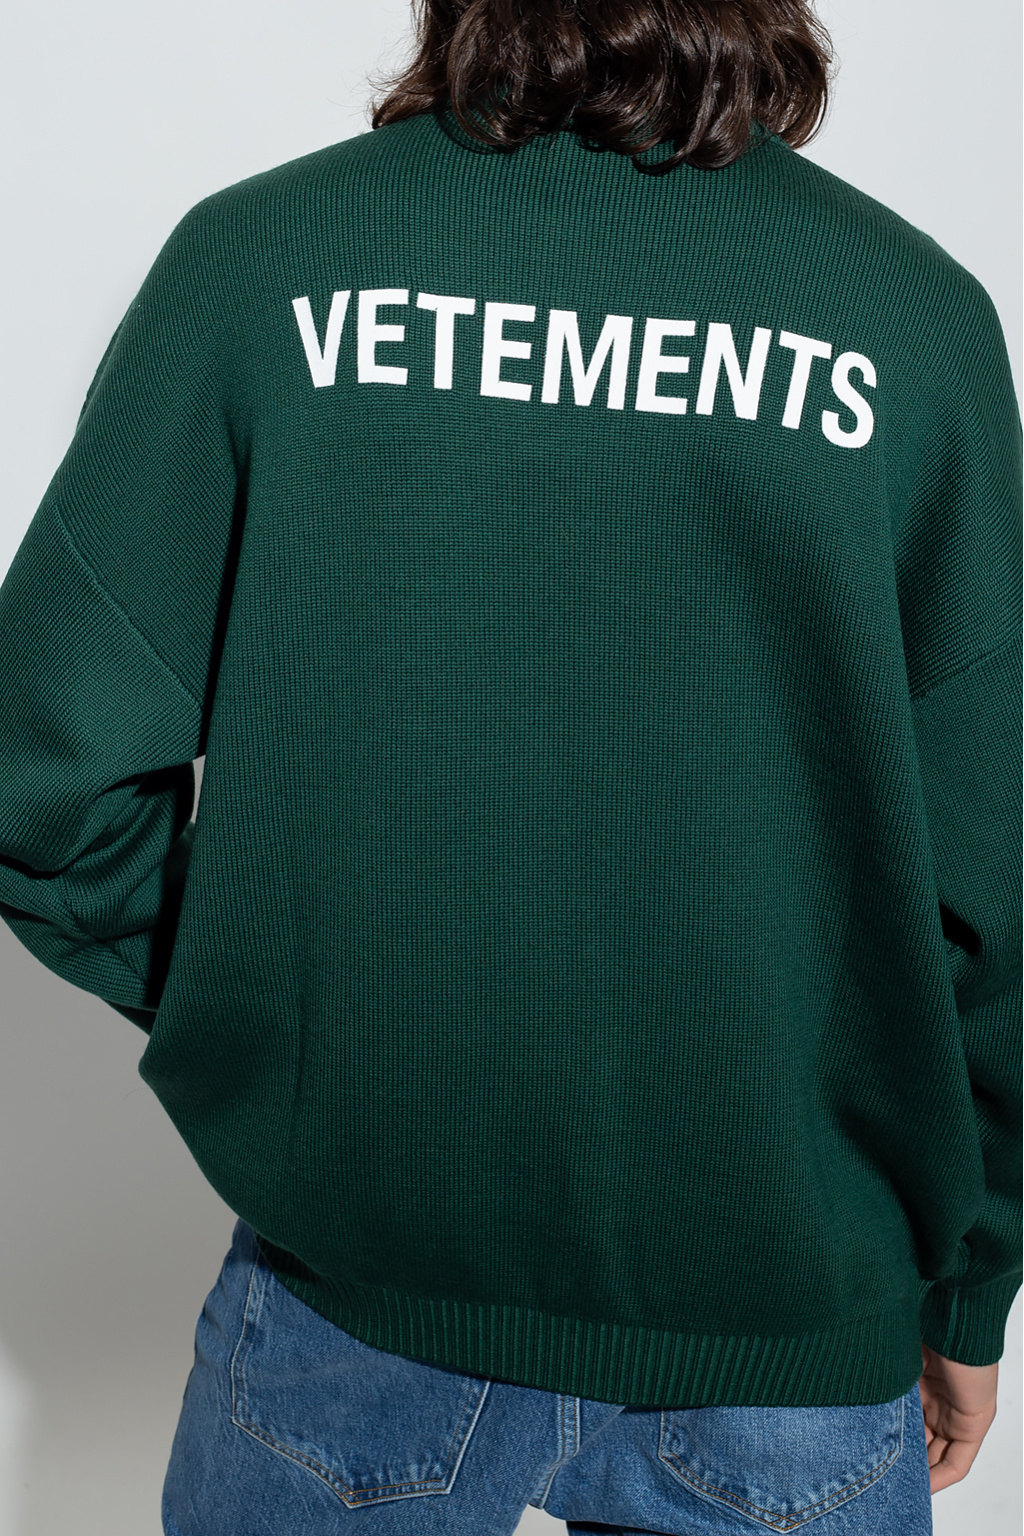 VETEMENTS office-accessories men polo-shirts cups Socks